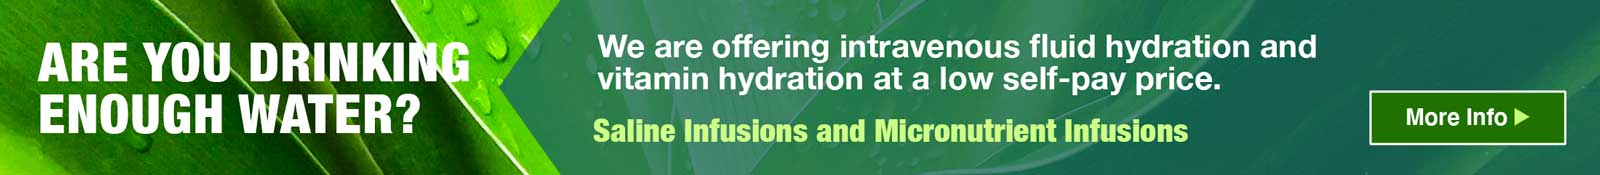 infusion hydration banner